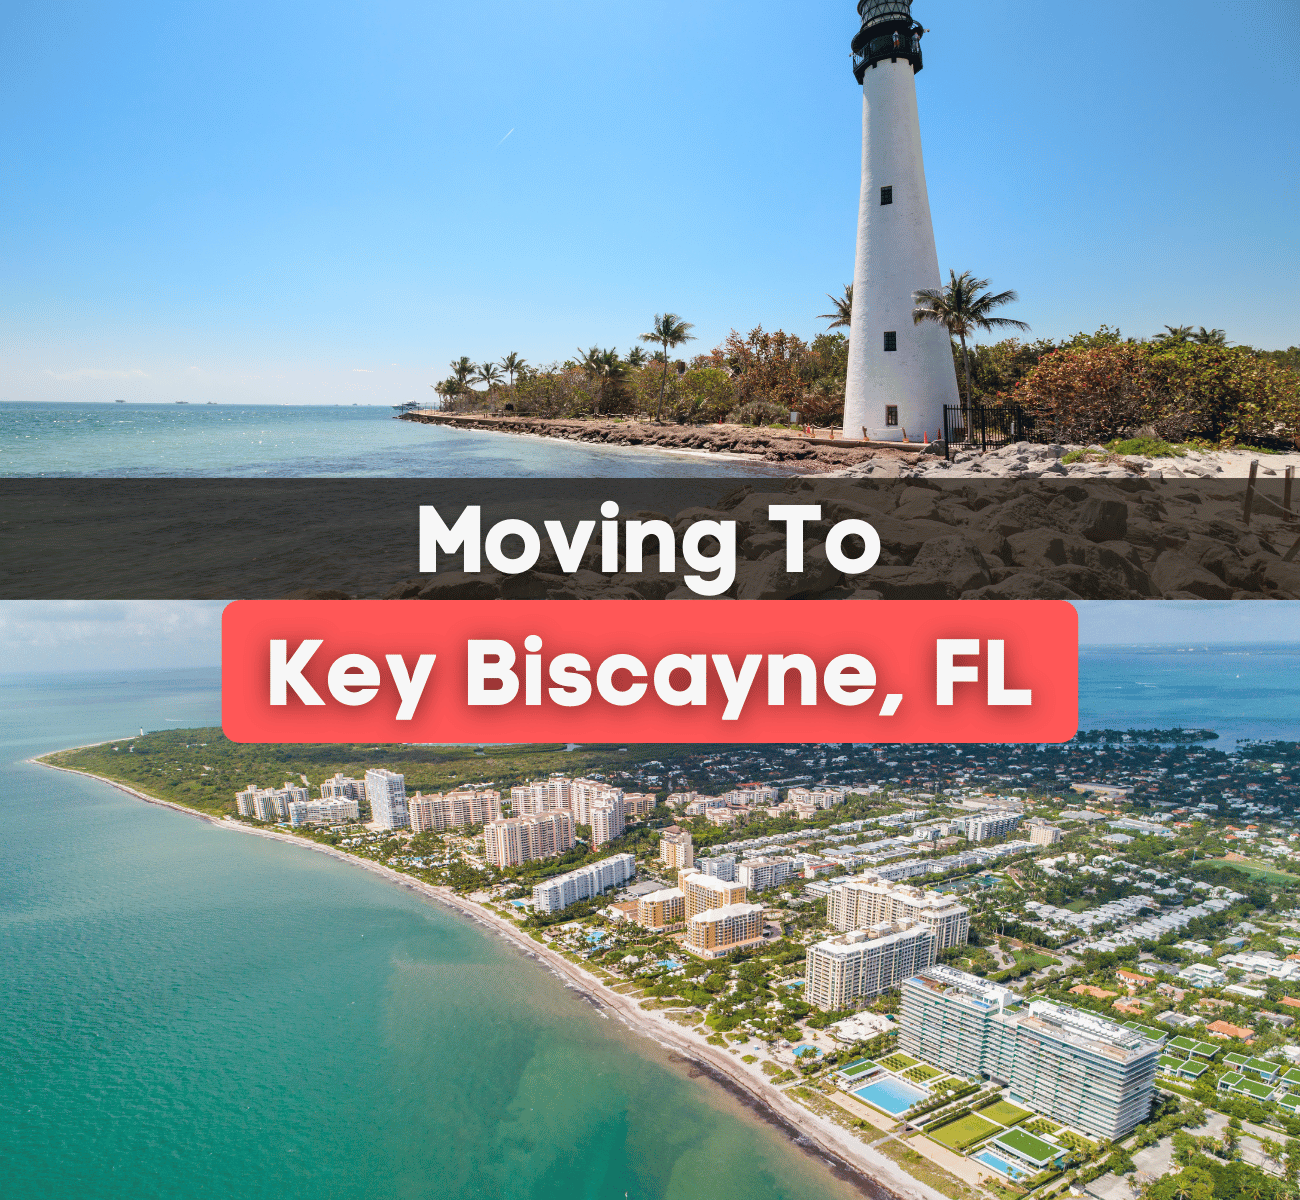 moving to Key Biscayne, FL graphic lighthouse and city near ocean 